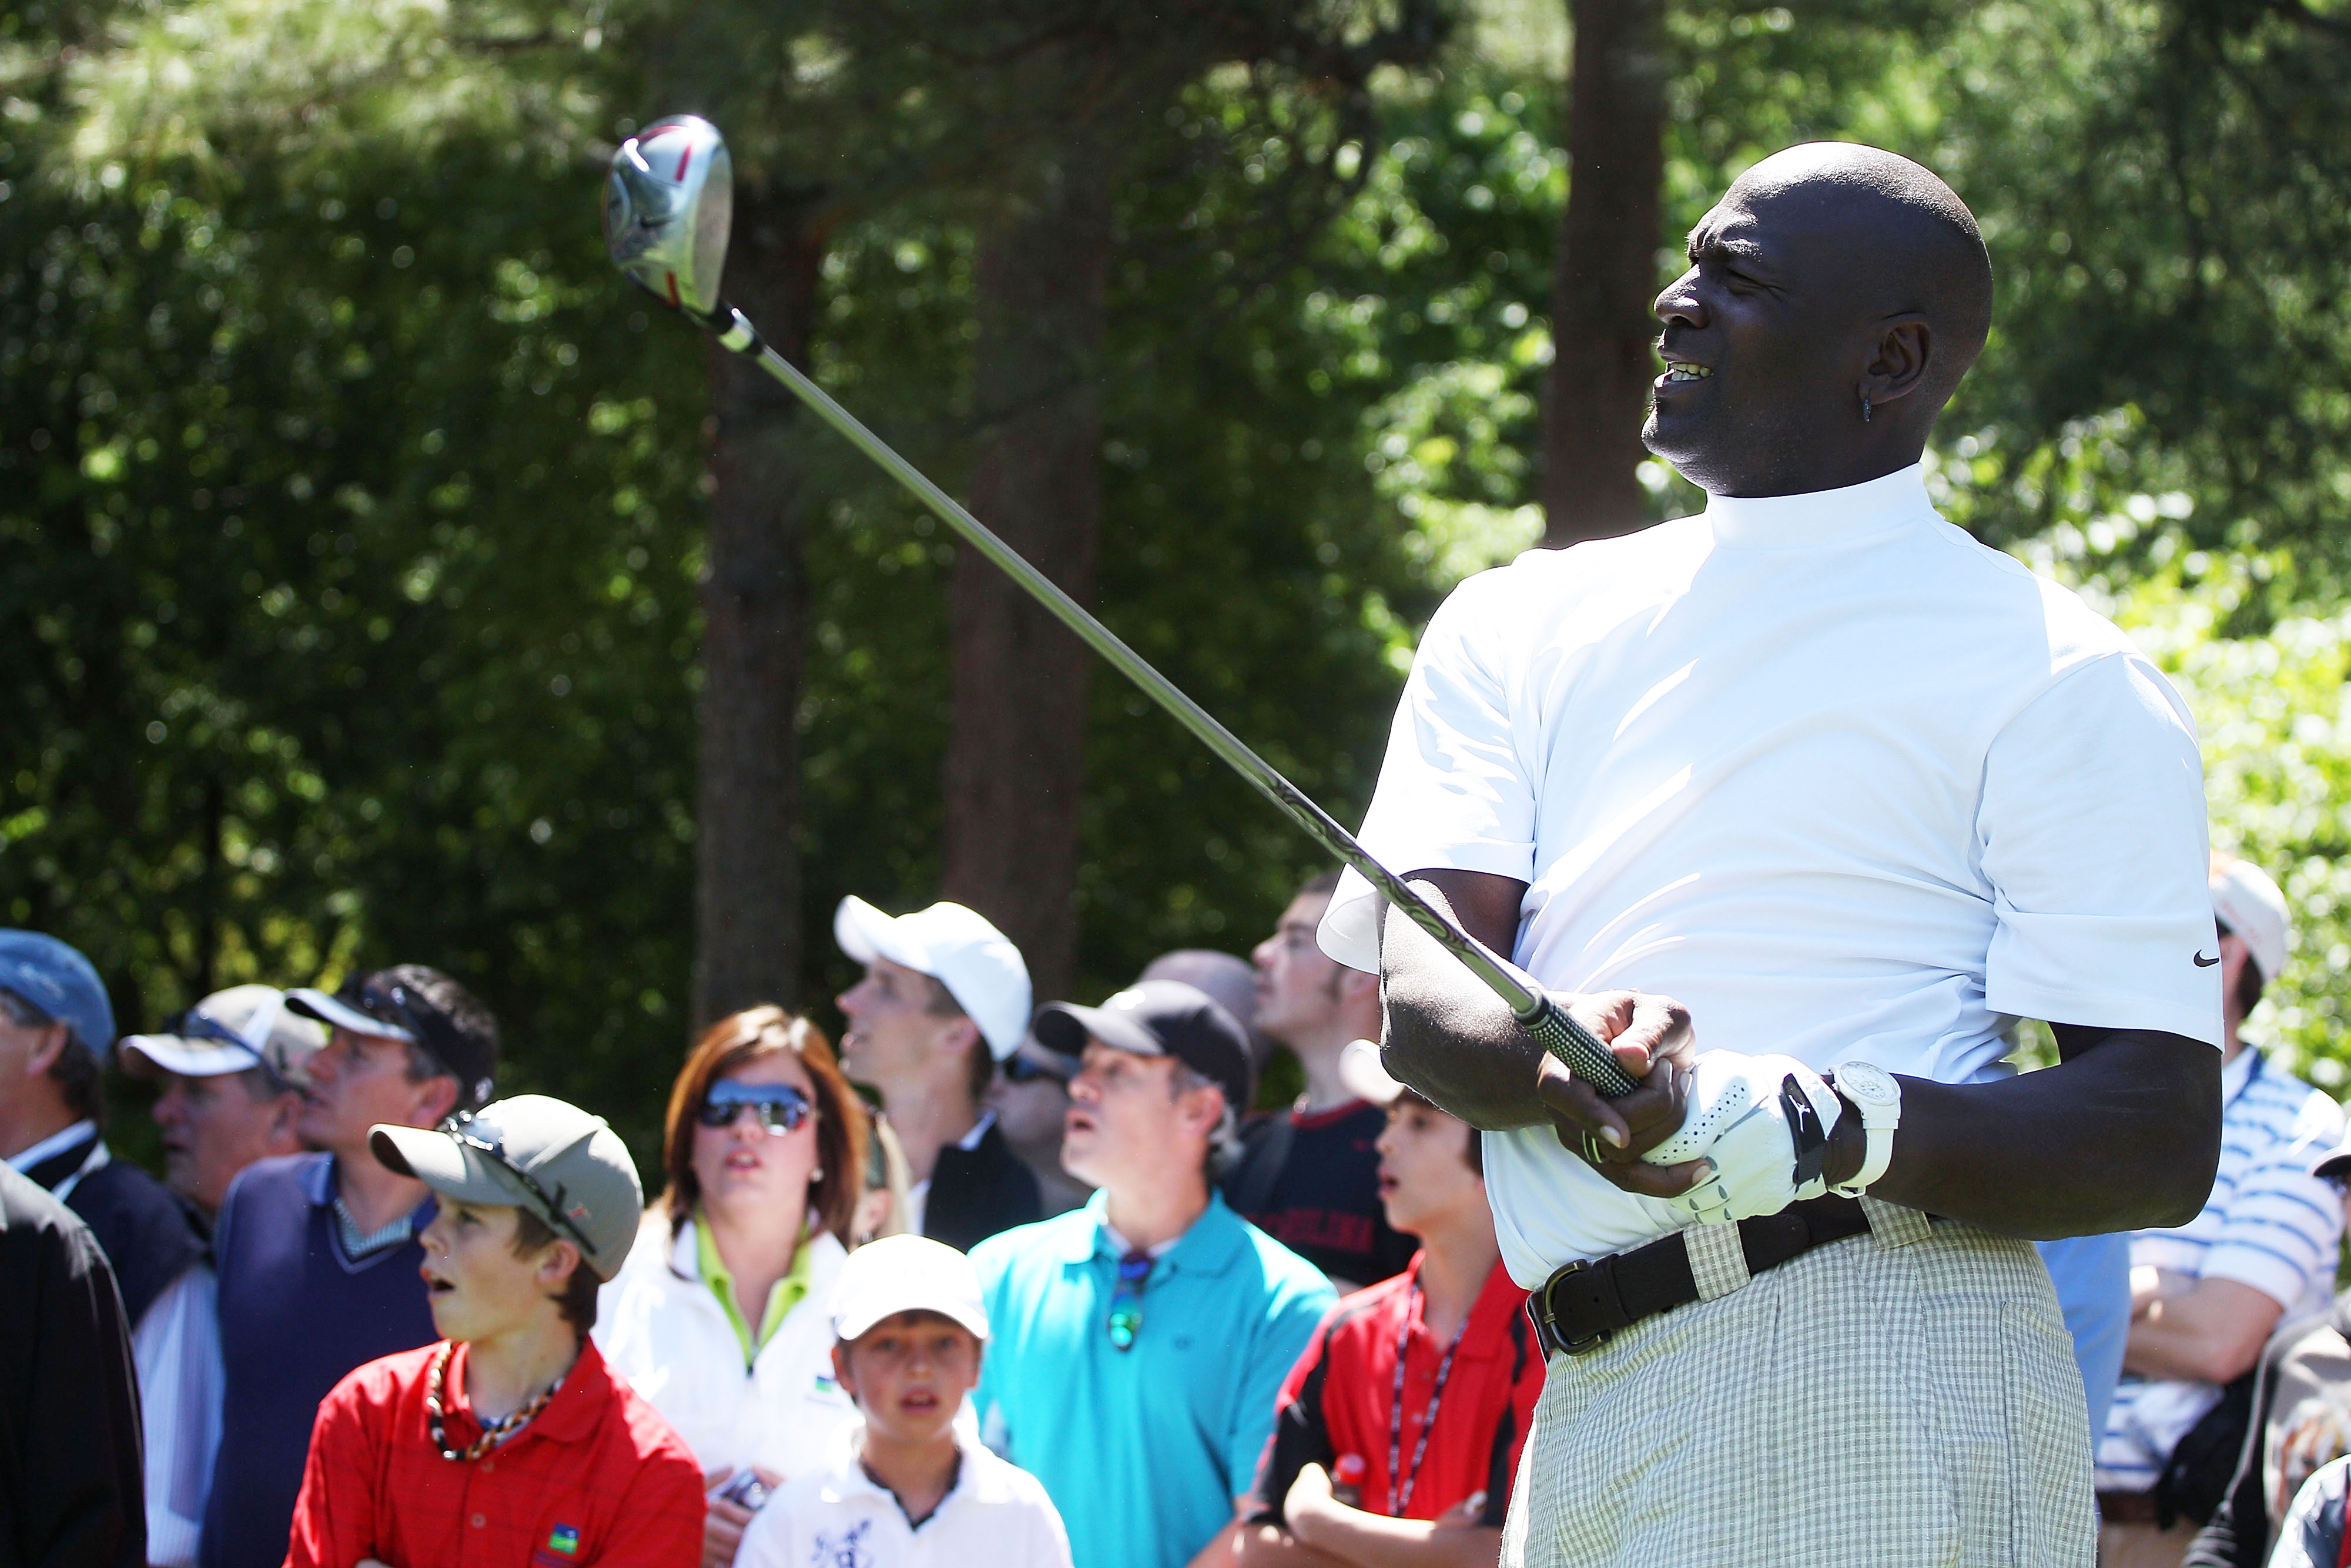 How Michael Jordan's Golf Course Sets Him Up to Win Against Pros